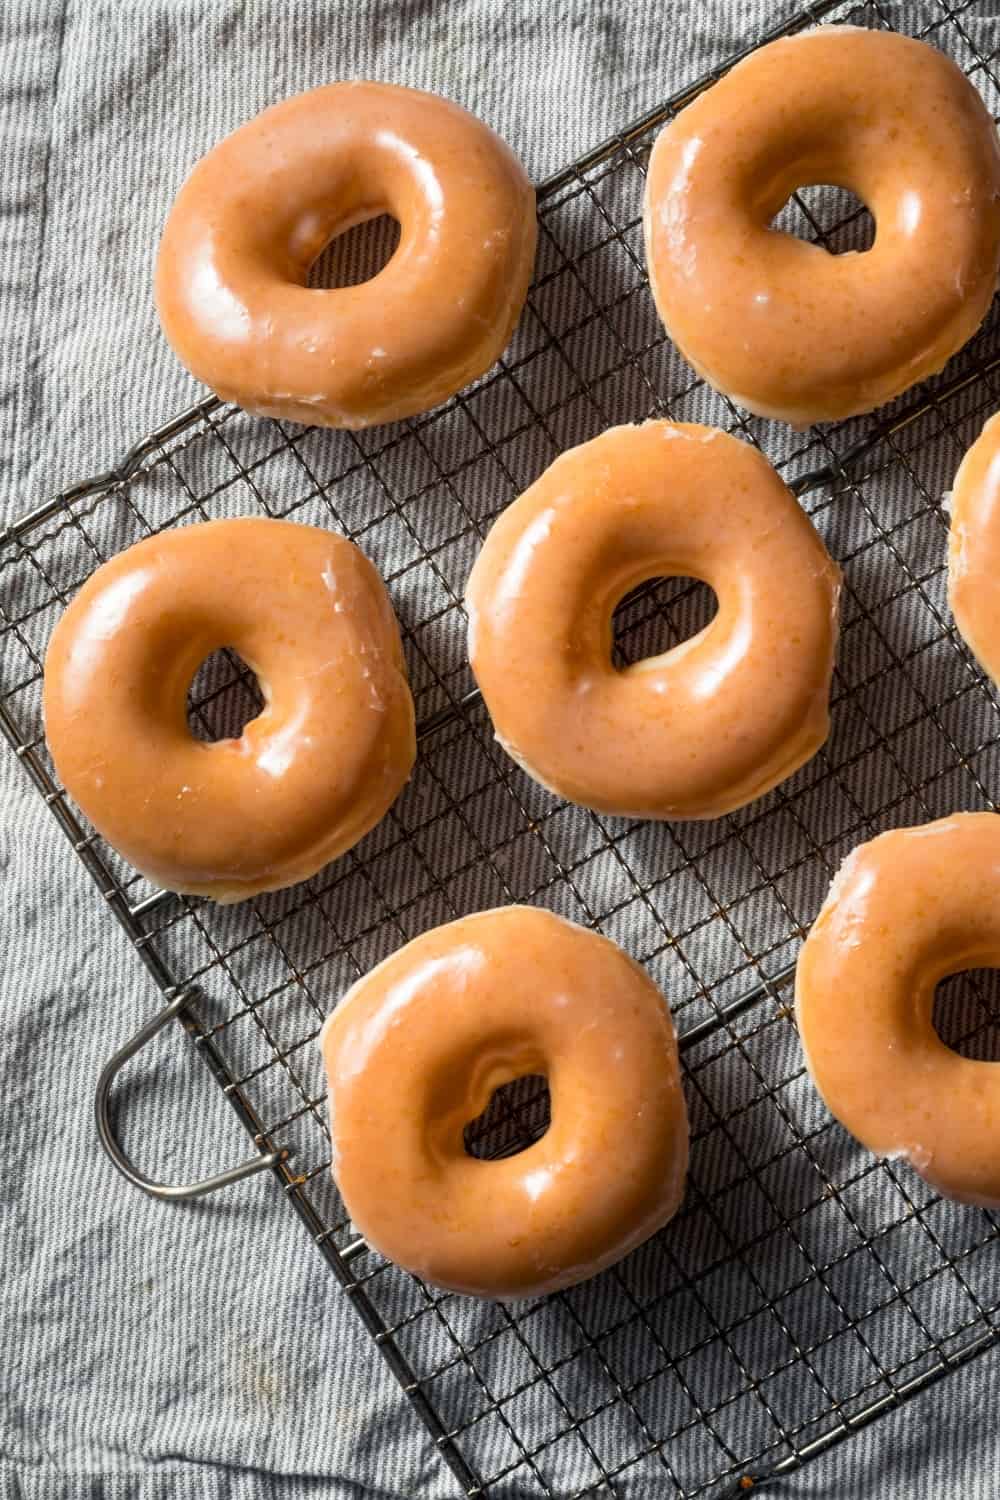 Homemade Glazed Yeast Donuts Ready to Eat